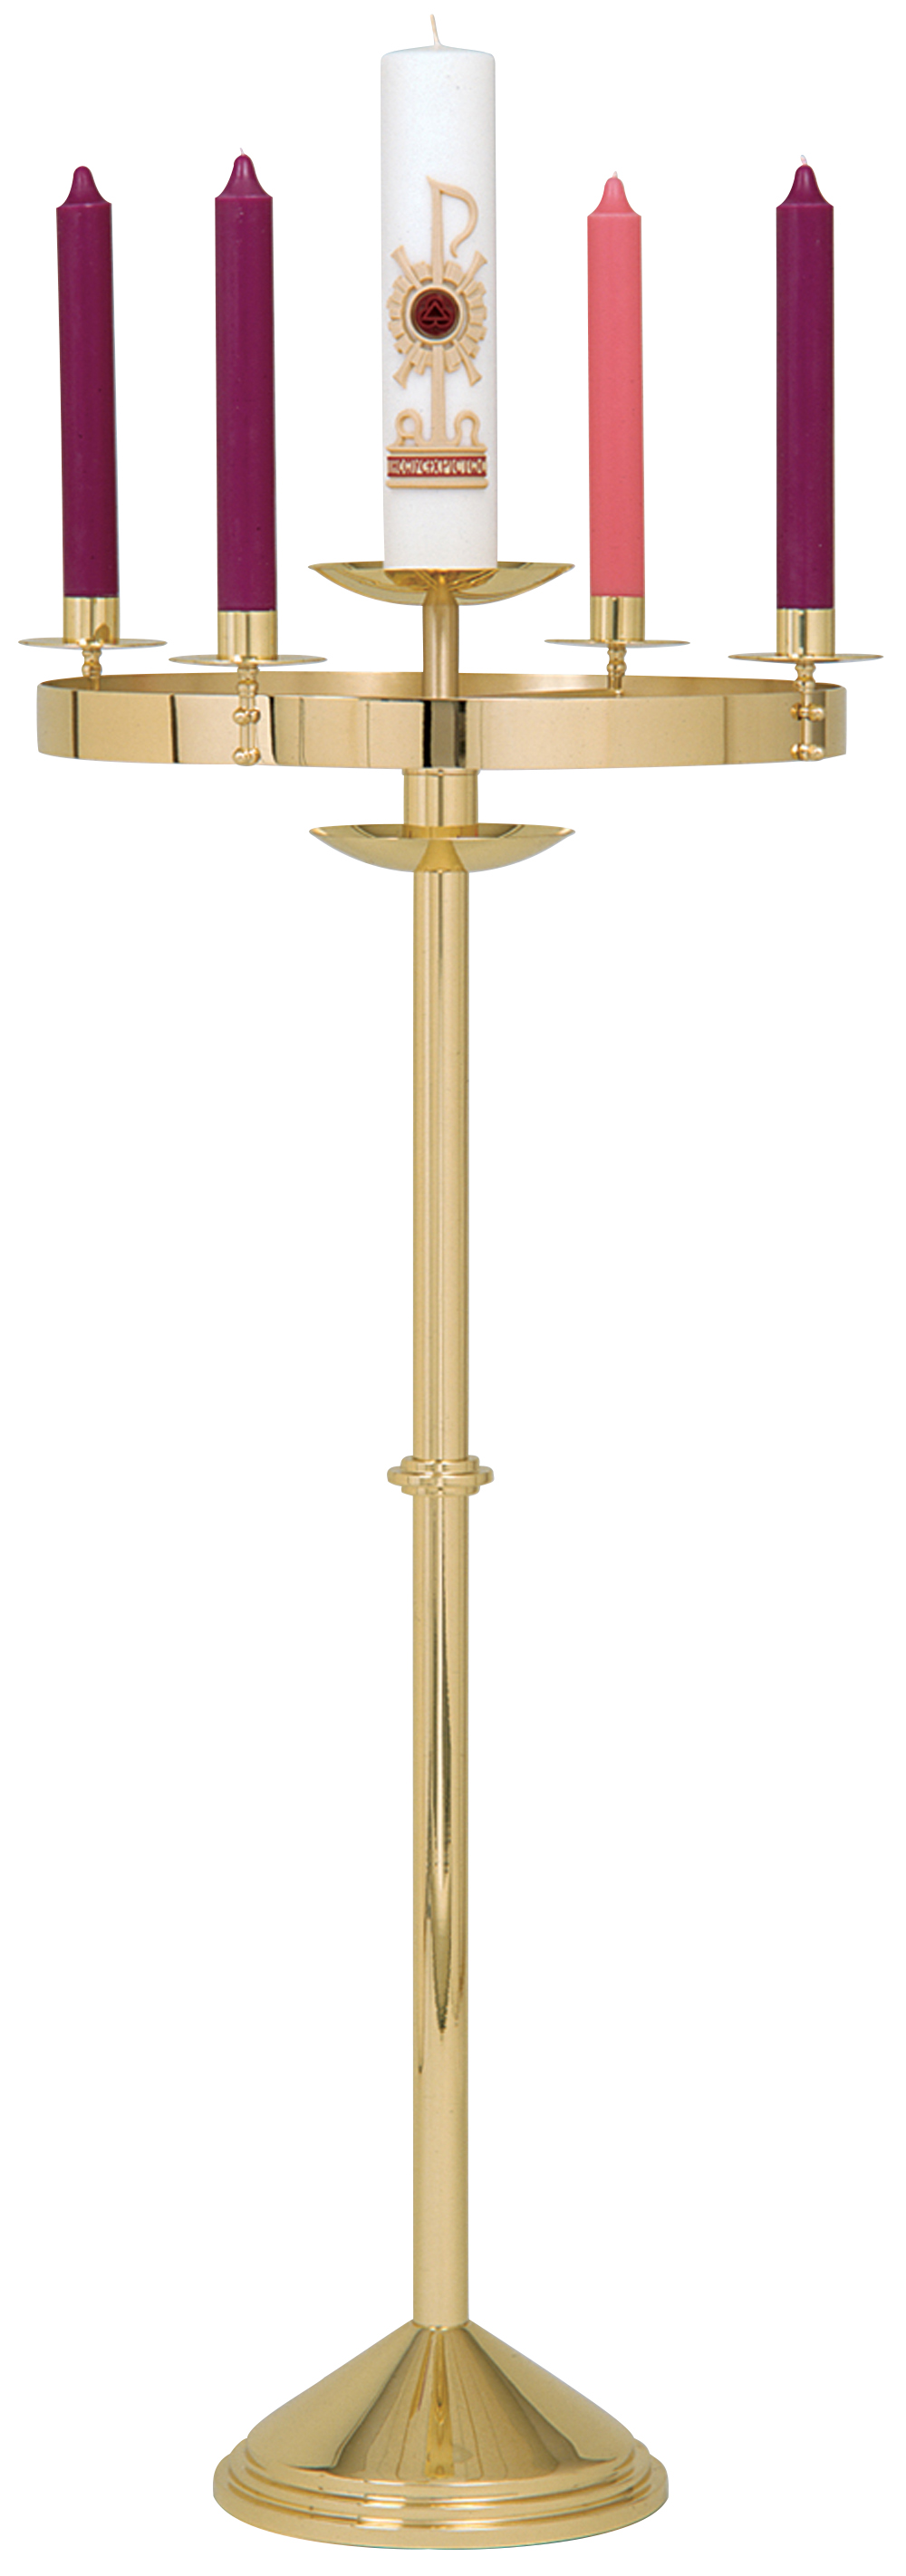 Advent Wreath and Paschal Candle Holder Standing Solid Brass